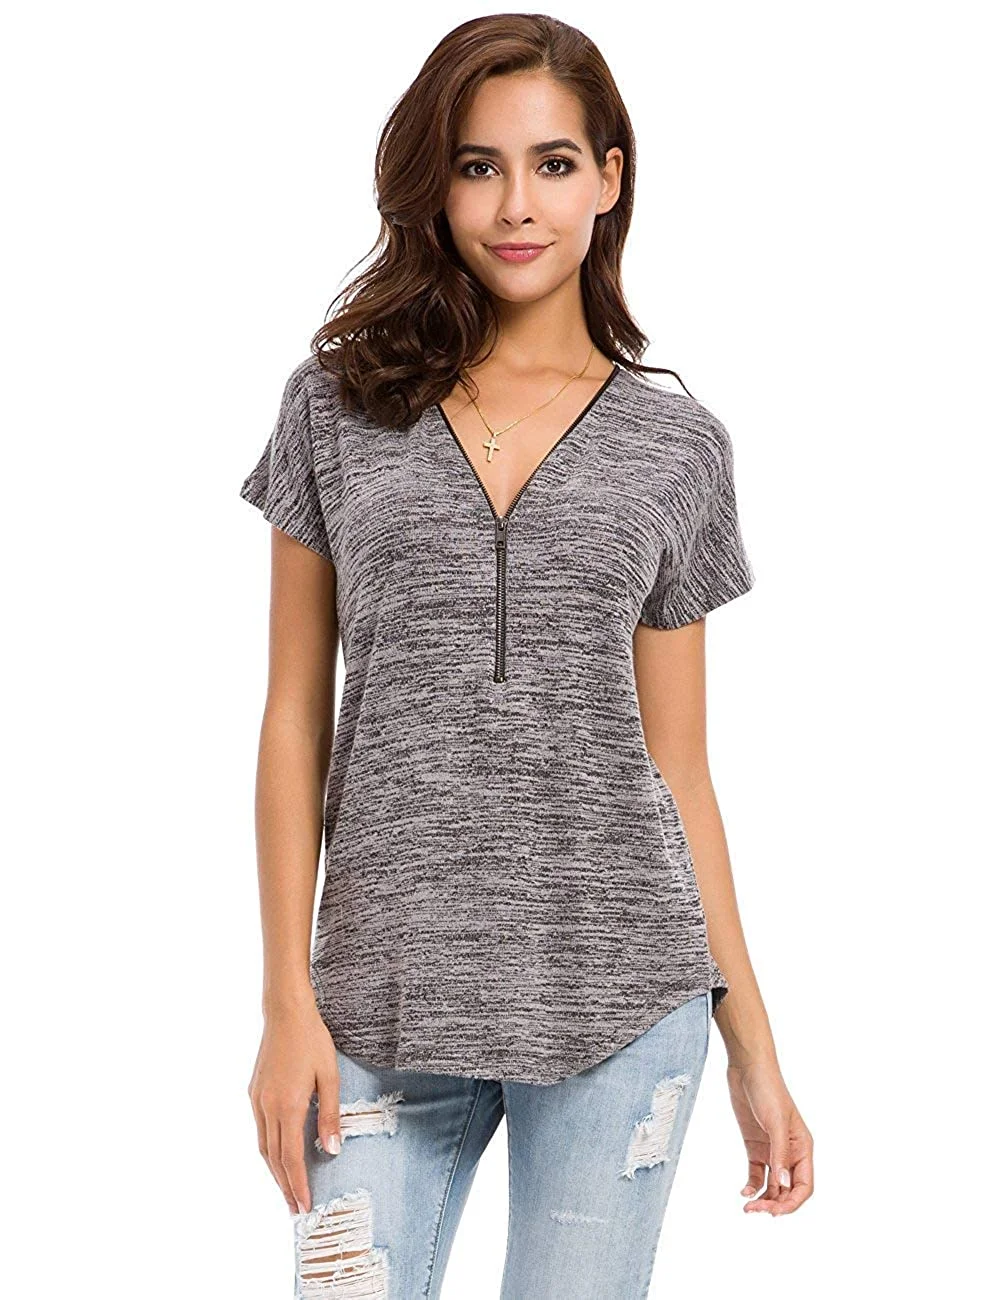 Womens Loose Fitting Zip Up Deep V Neck Short Sleeve Tops Tunic Casual T Shirts Blouse